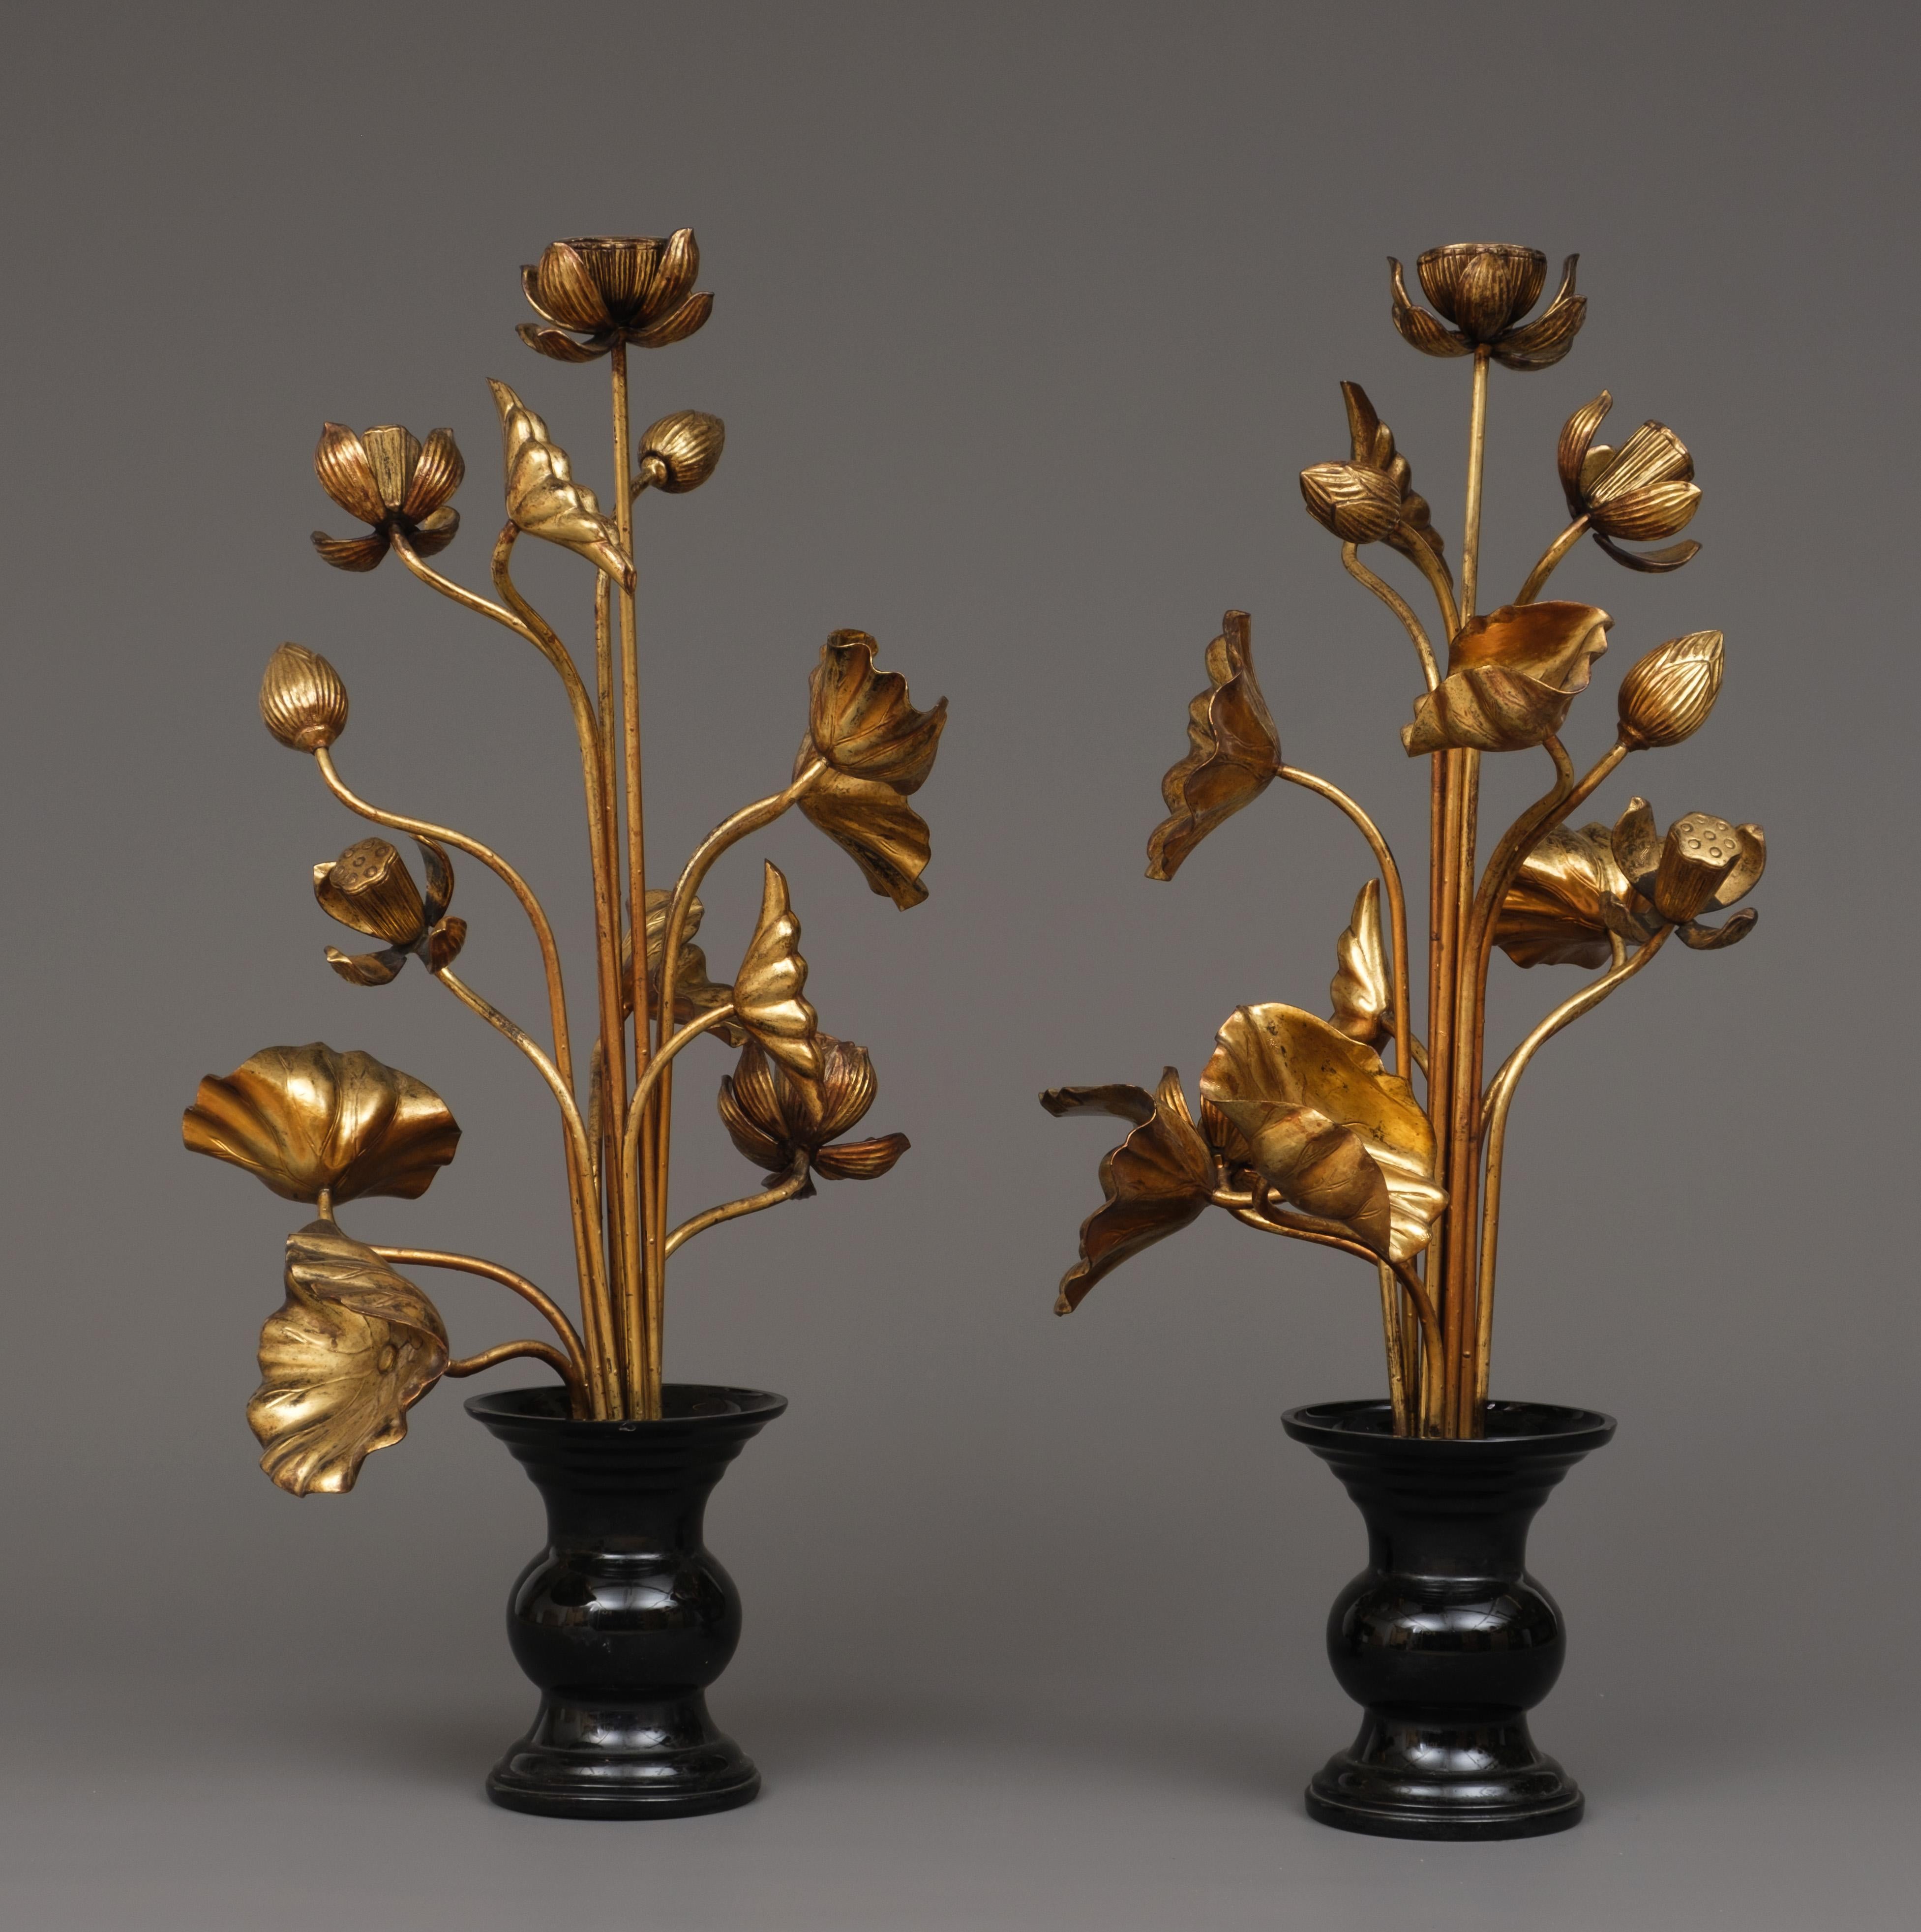 19th Century Large pair of Japanese ‘Jyôka’ 常花, sets of gilded lotus flowers and -leaves. For Sale